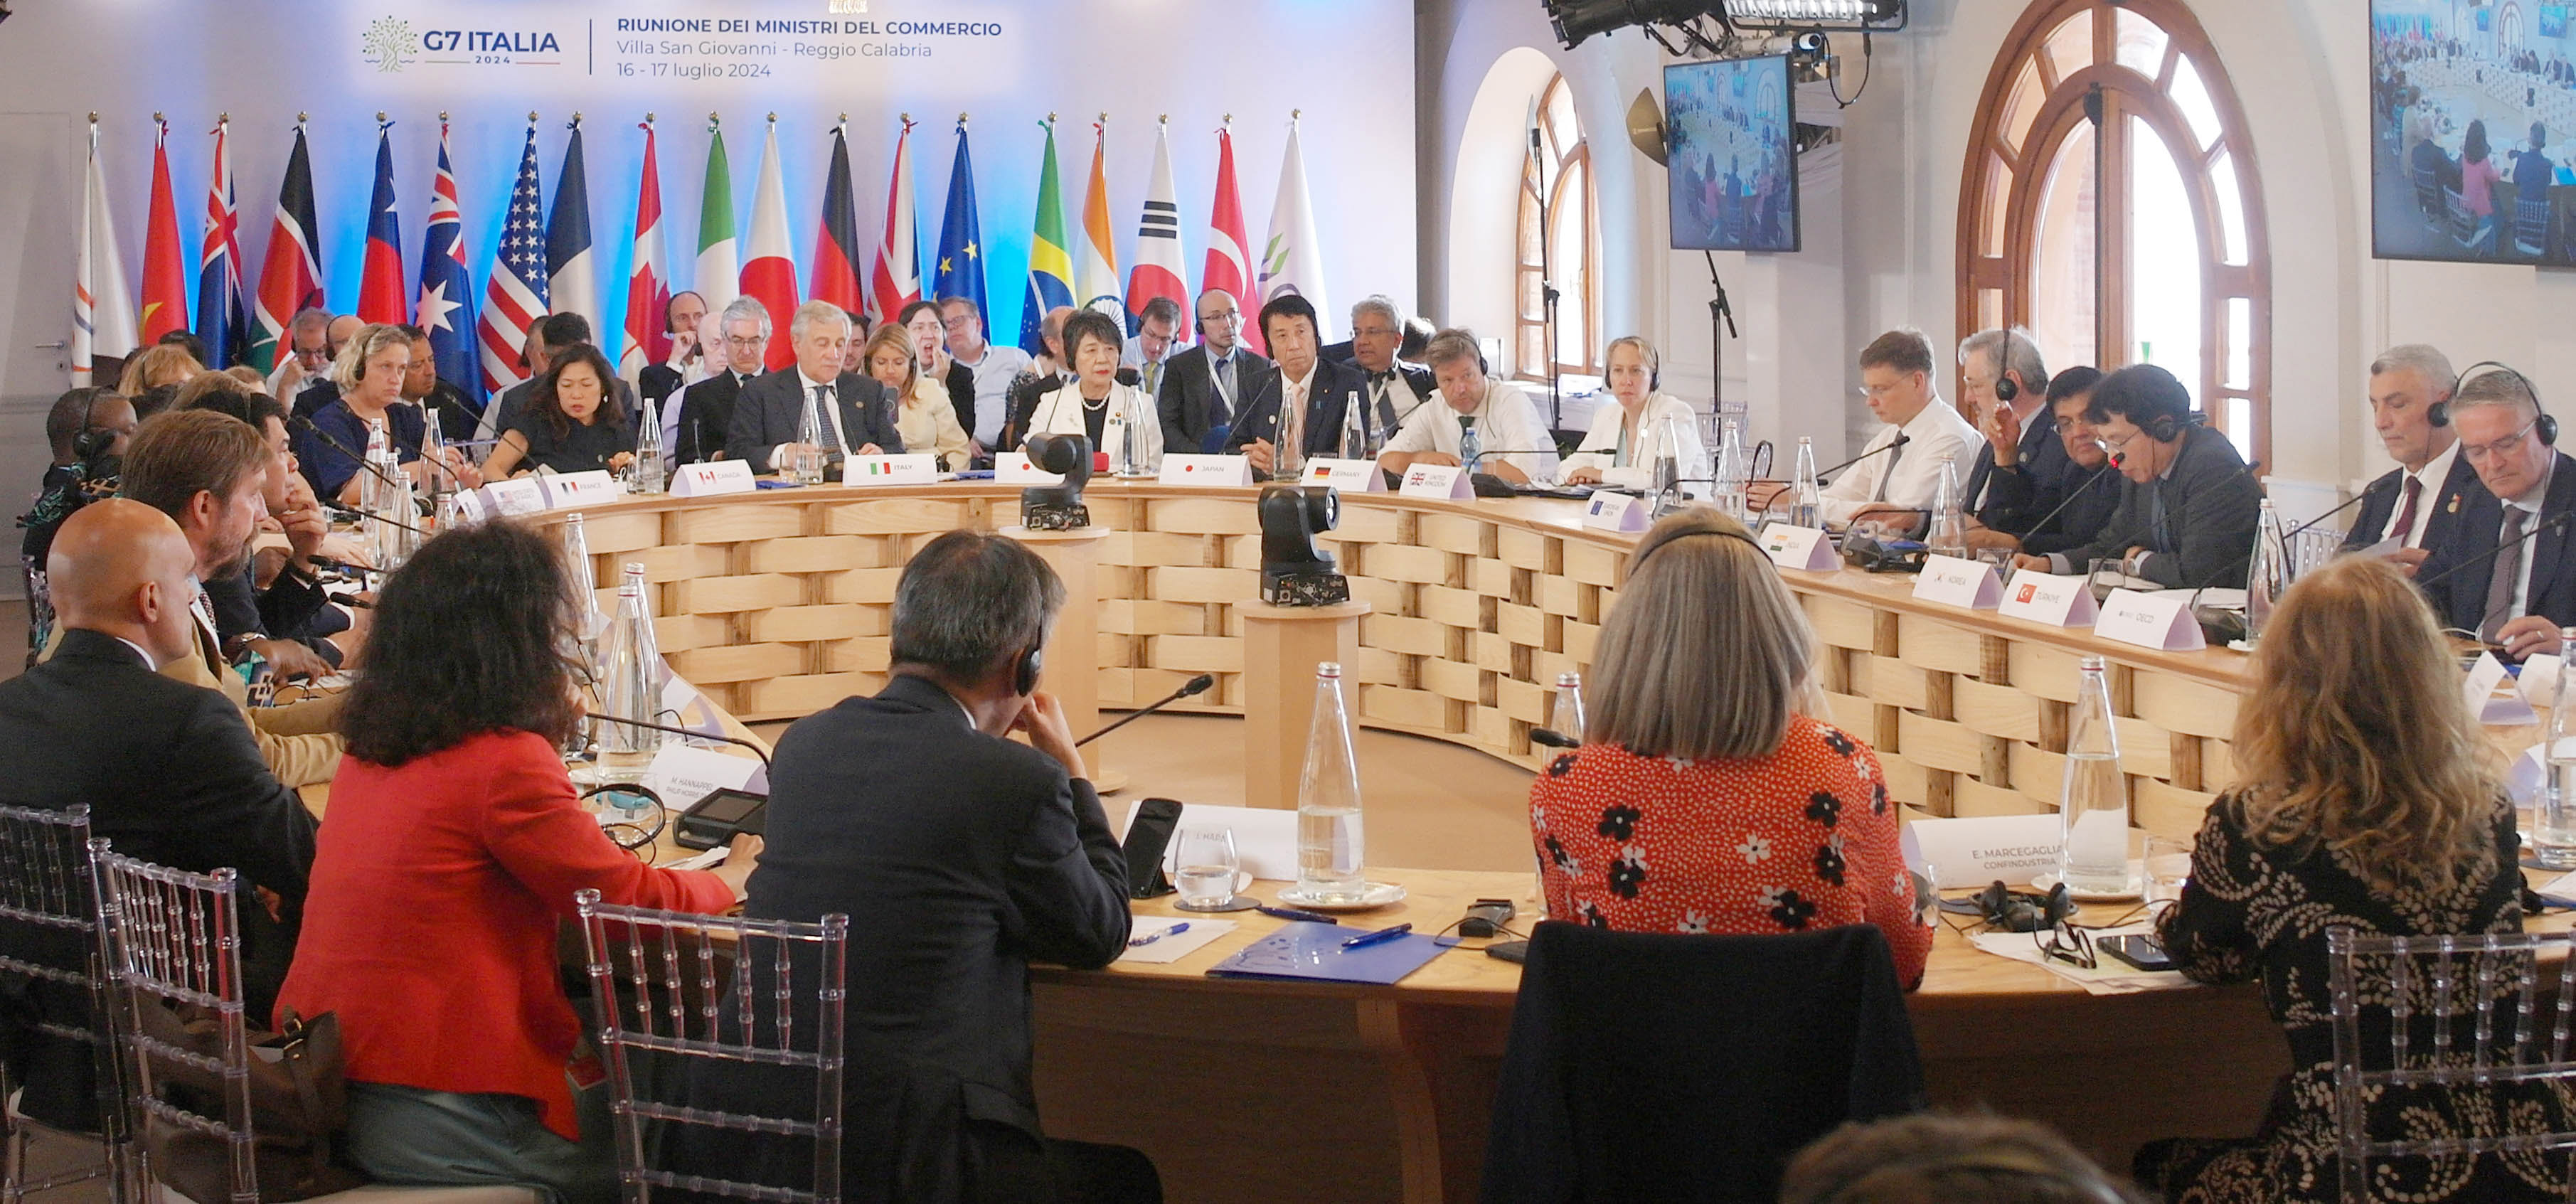 G7 Trade Ministers’ Meeting Outreach Session 